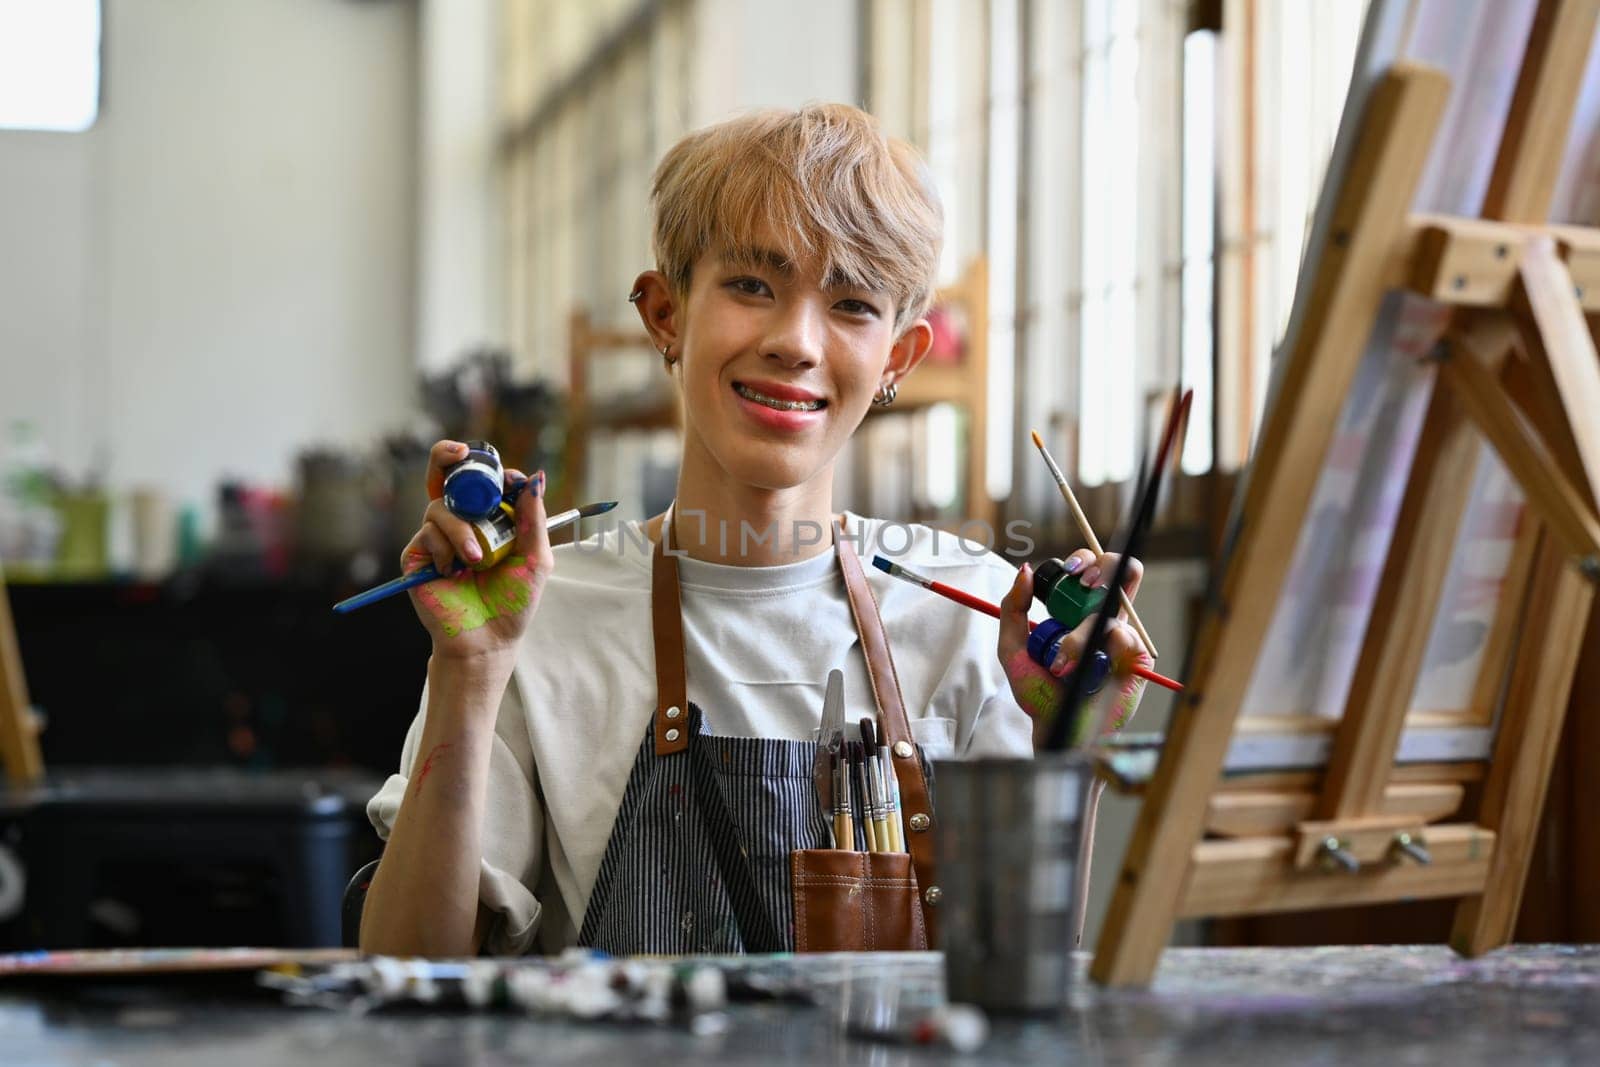 Smiling young Asian gay man enjoying creative activity, painting in art workshop. Hobby and leisure concept.